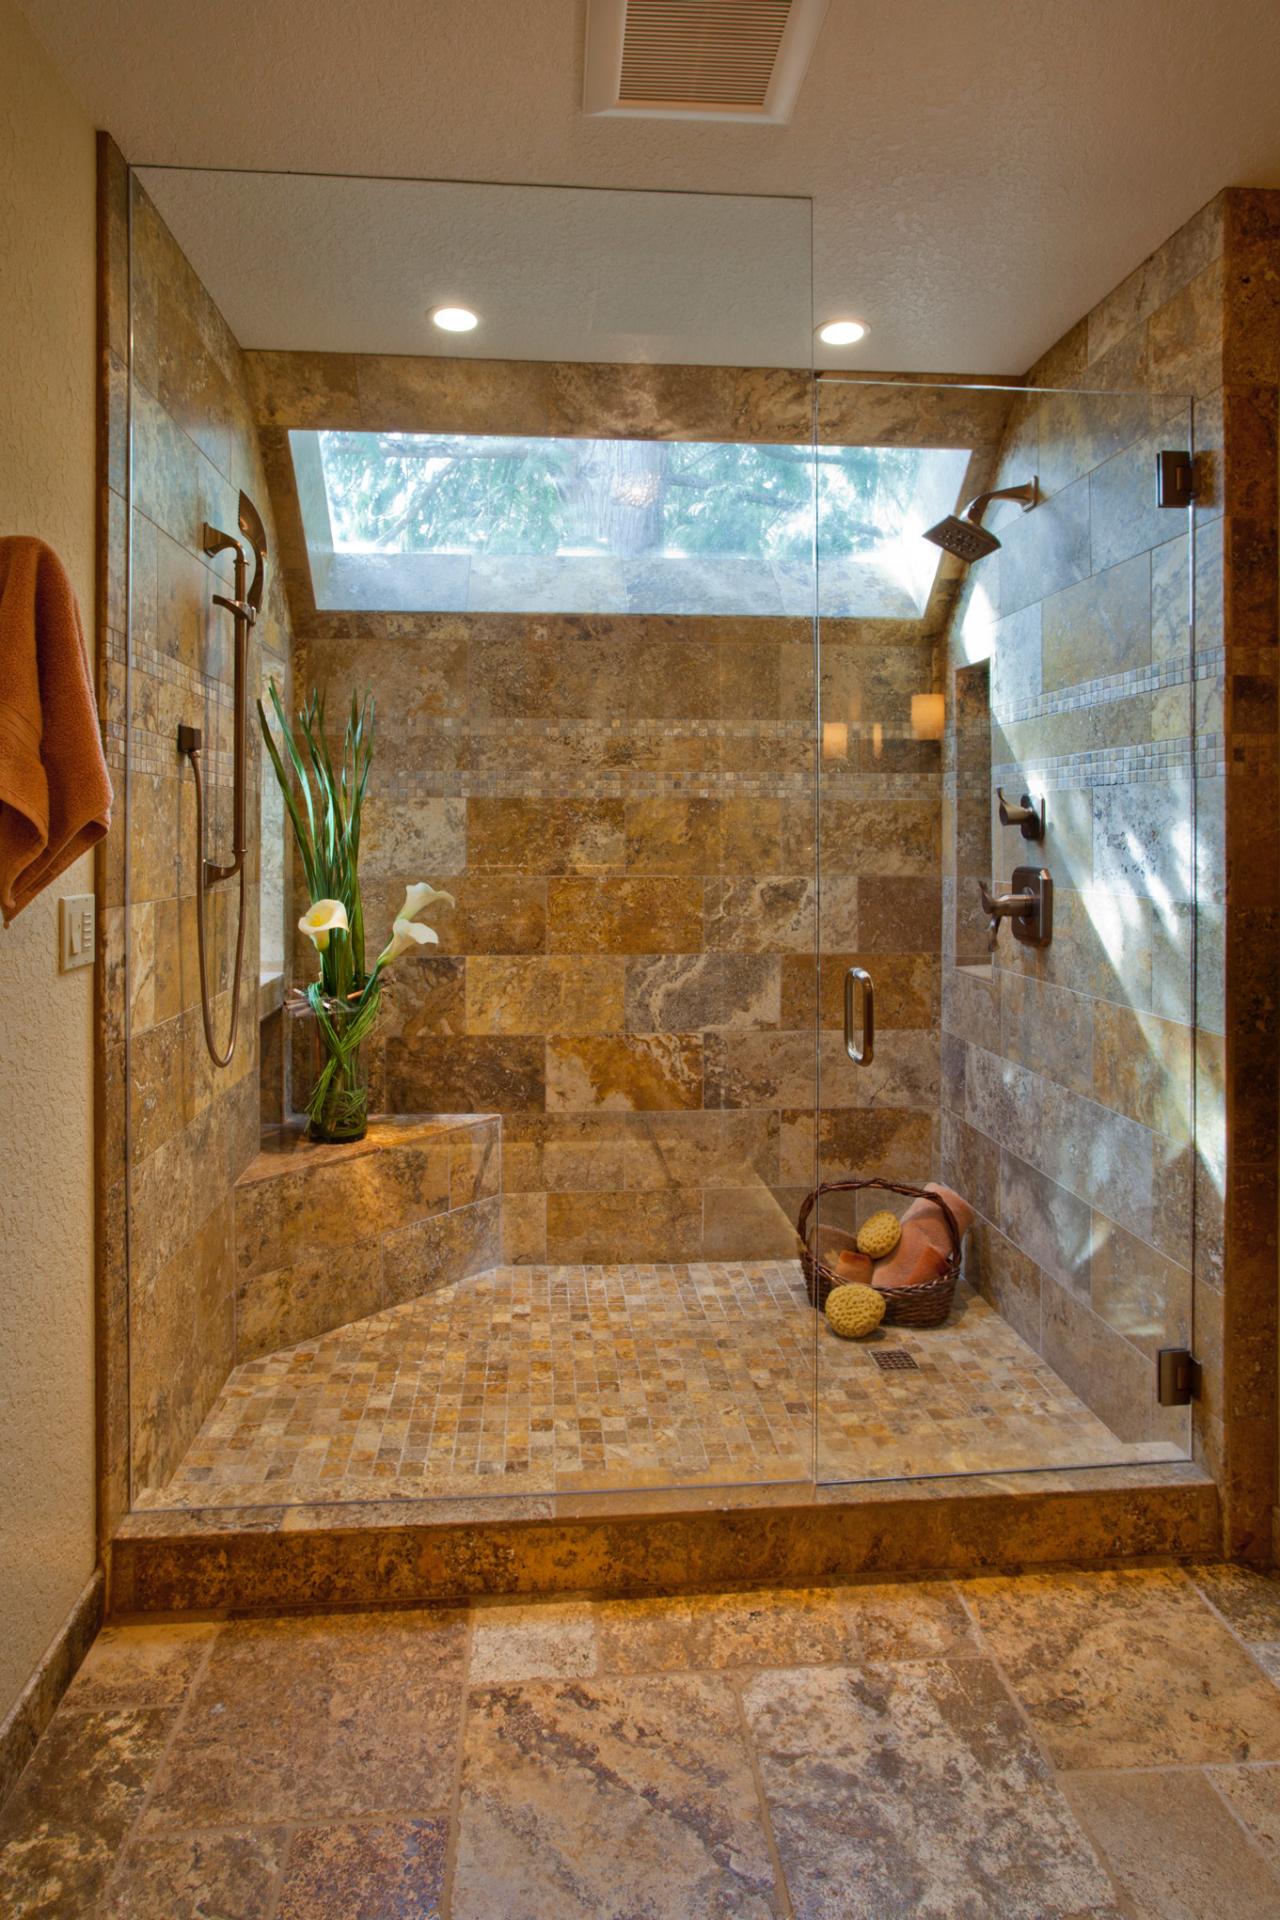 Elegant Walk-In Shower With Tile Walls and Skylight | HGTV